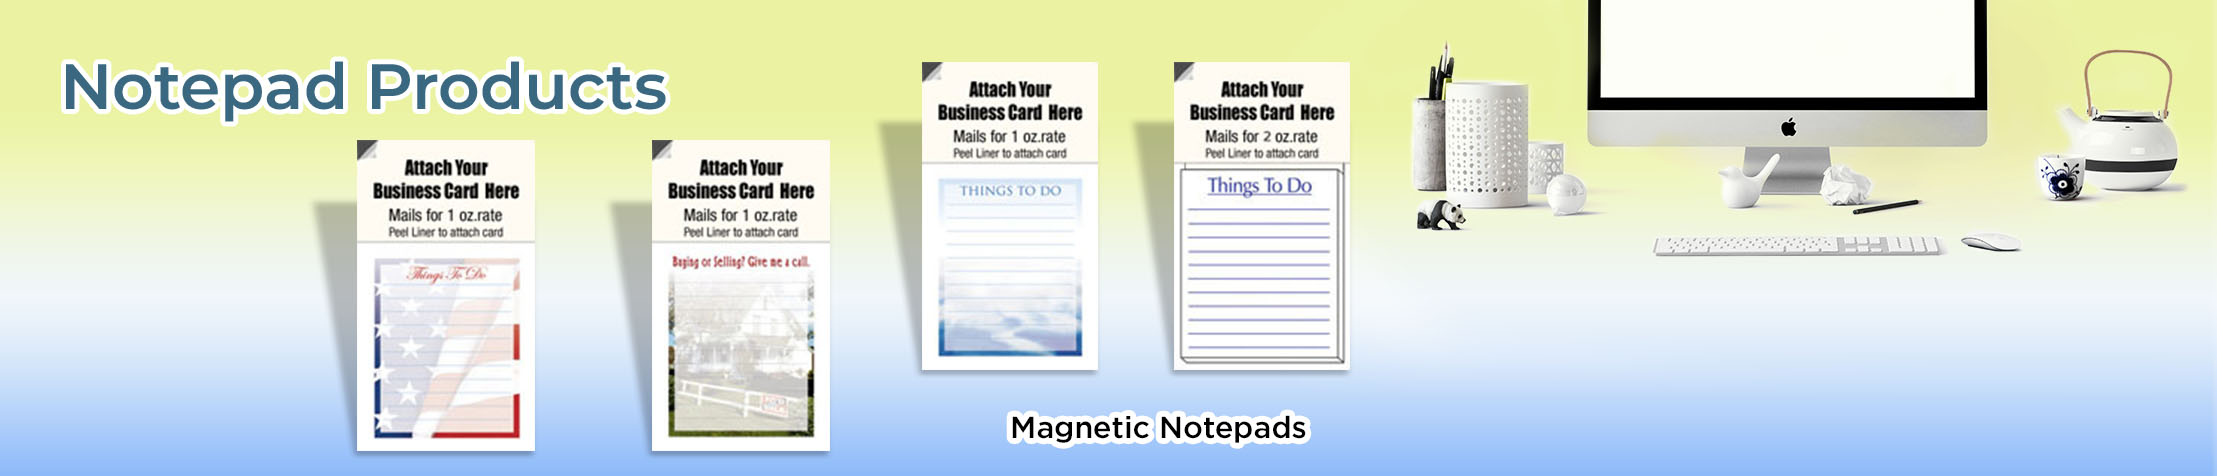 Amerivest Realty Real Estate Notepads - Amerivest Realty custom stationery and marketing tools, magnetic and personalized notepads | BestPrintBuy.com